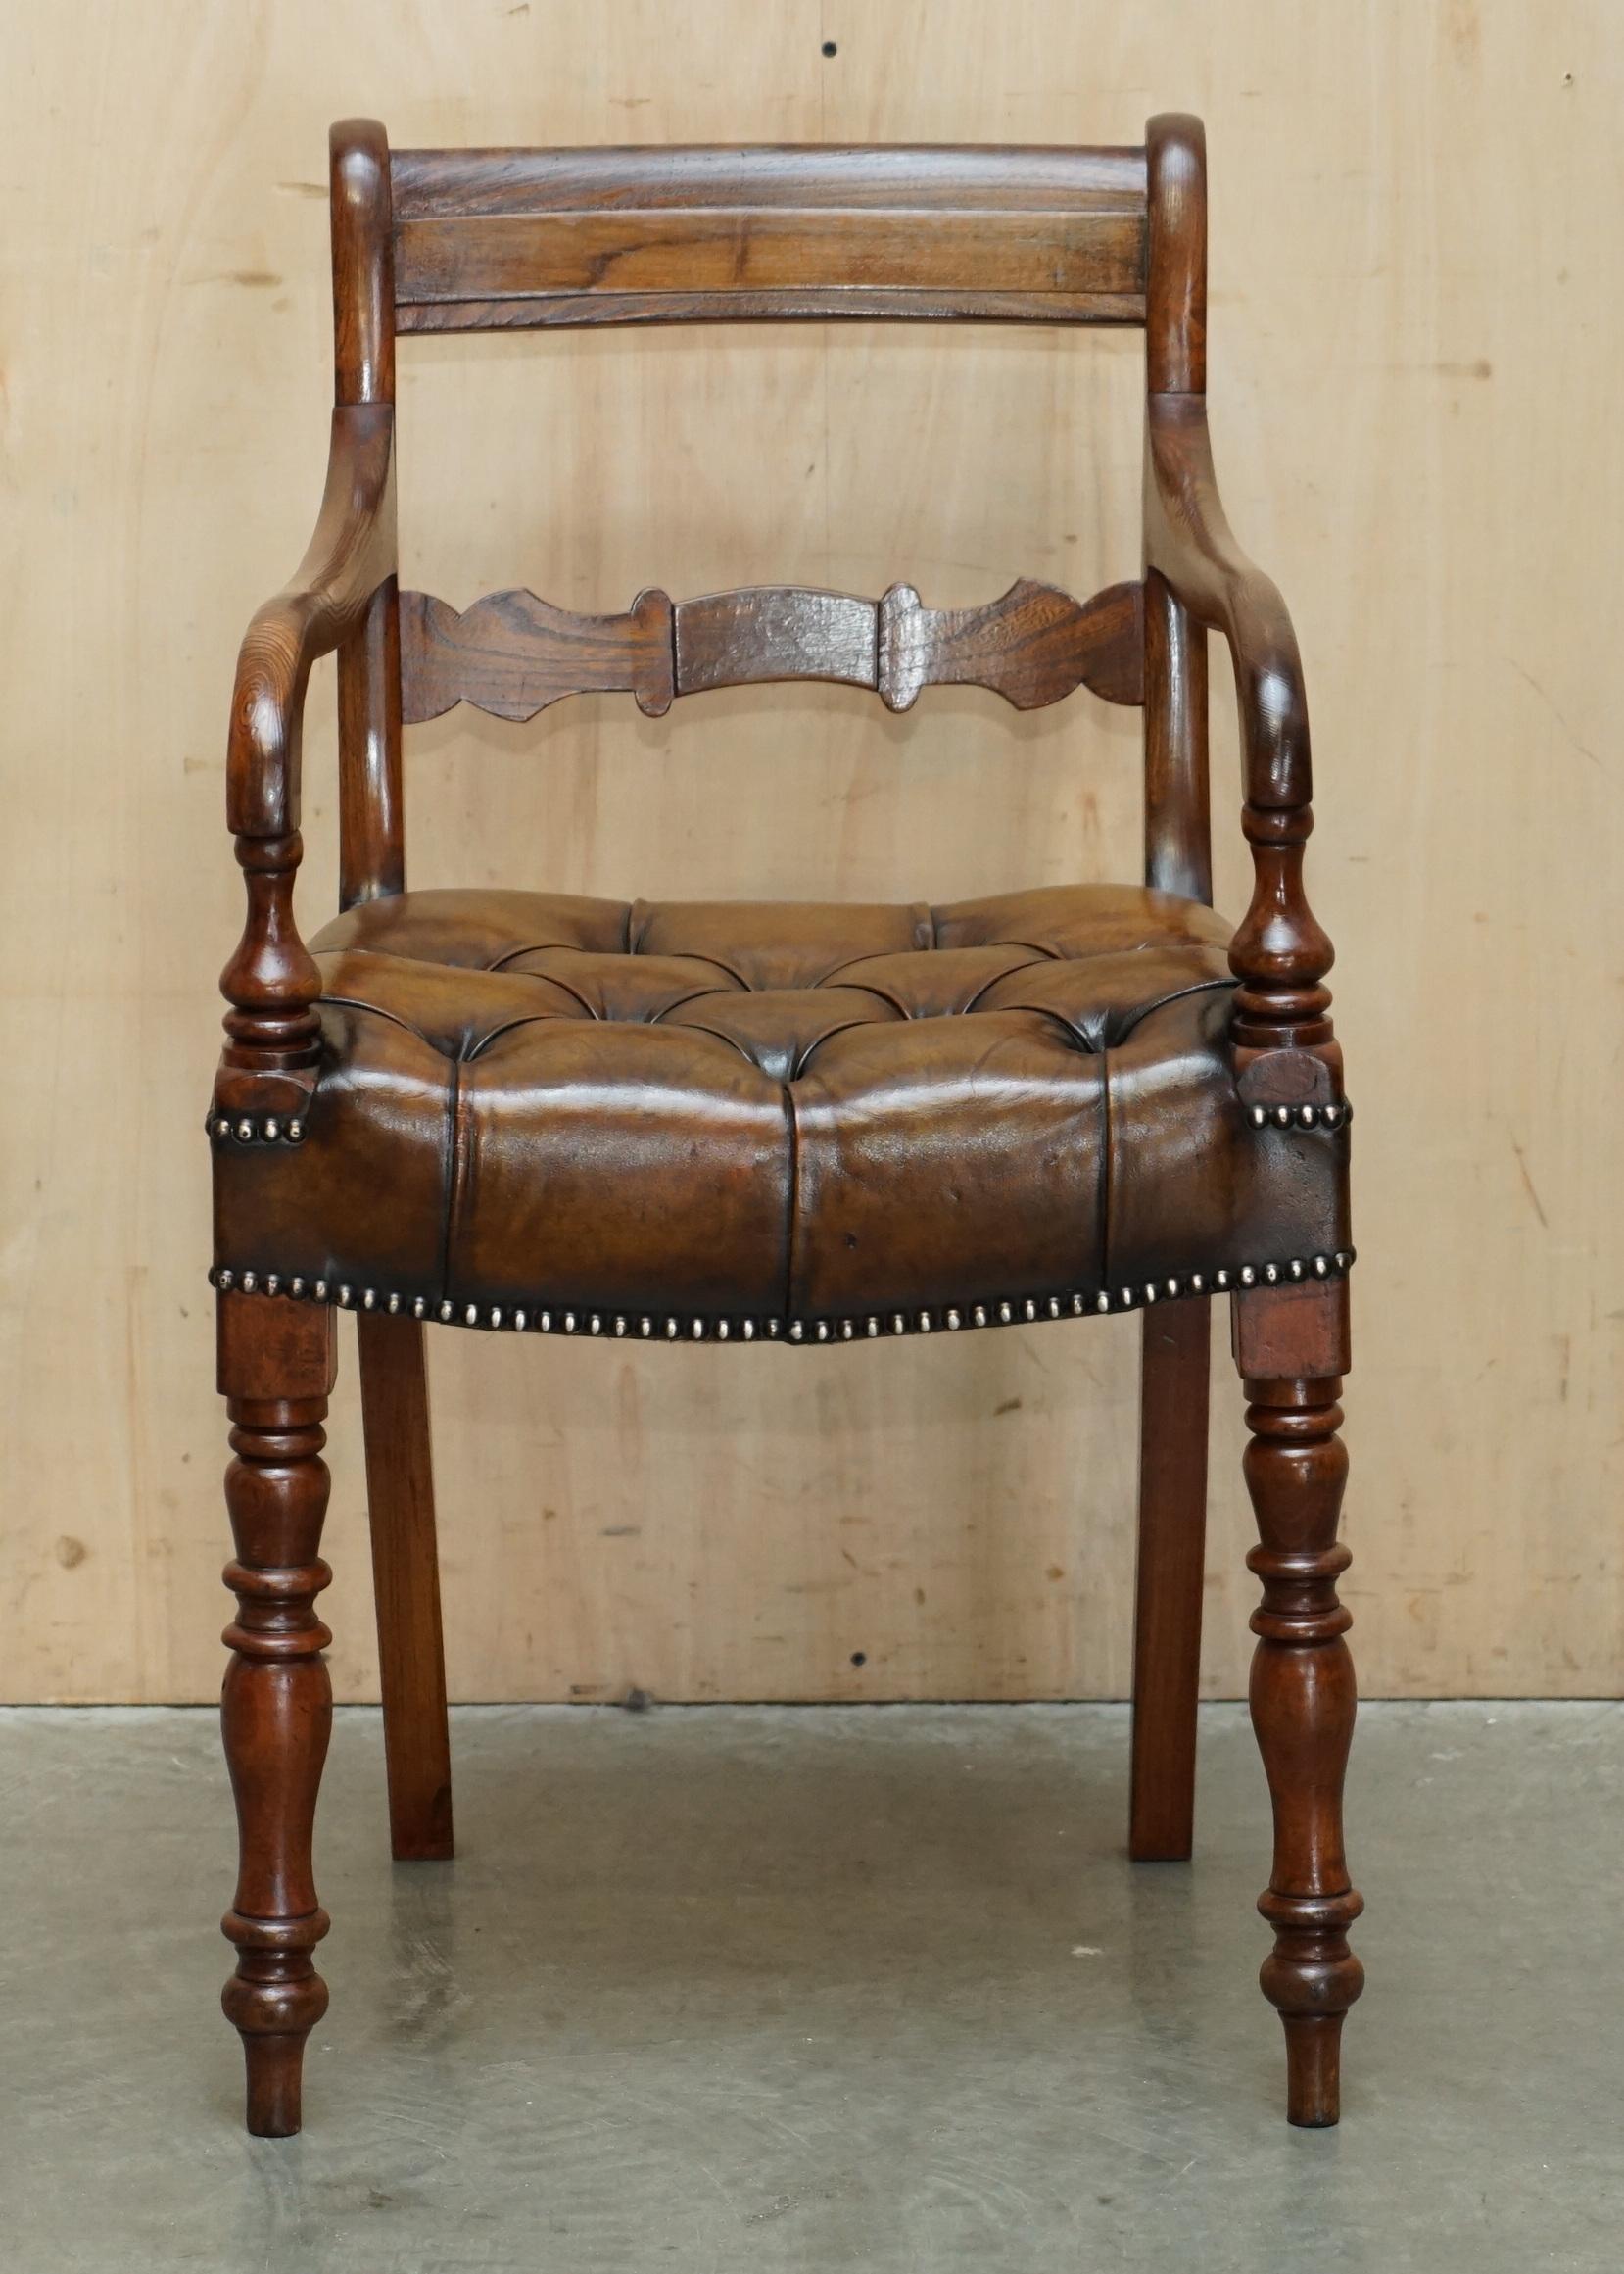 Royal House Antiques

Royal House Antiques is delighted to offer for sale this lovely, antique, fully restored original Elm framed Regency circa 1810-1820 hand dyed Chesterfield brown leather chair.

Please note the delivery fee listed is just a